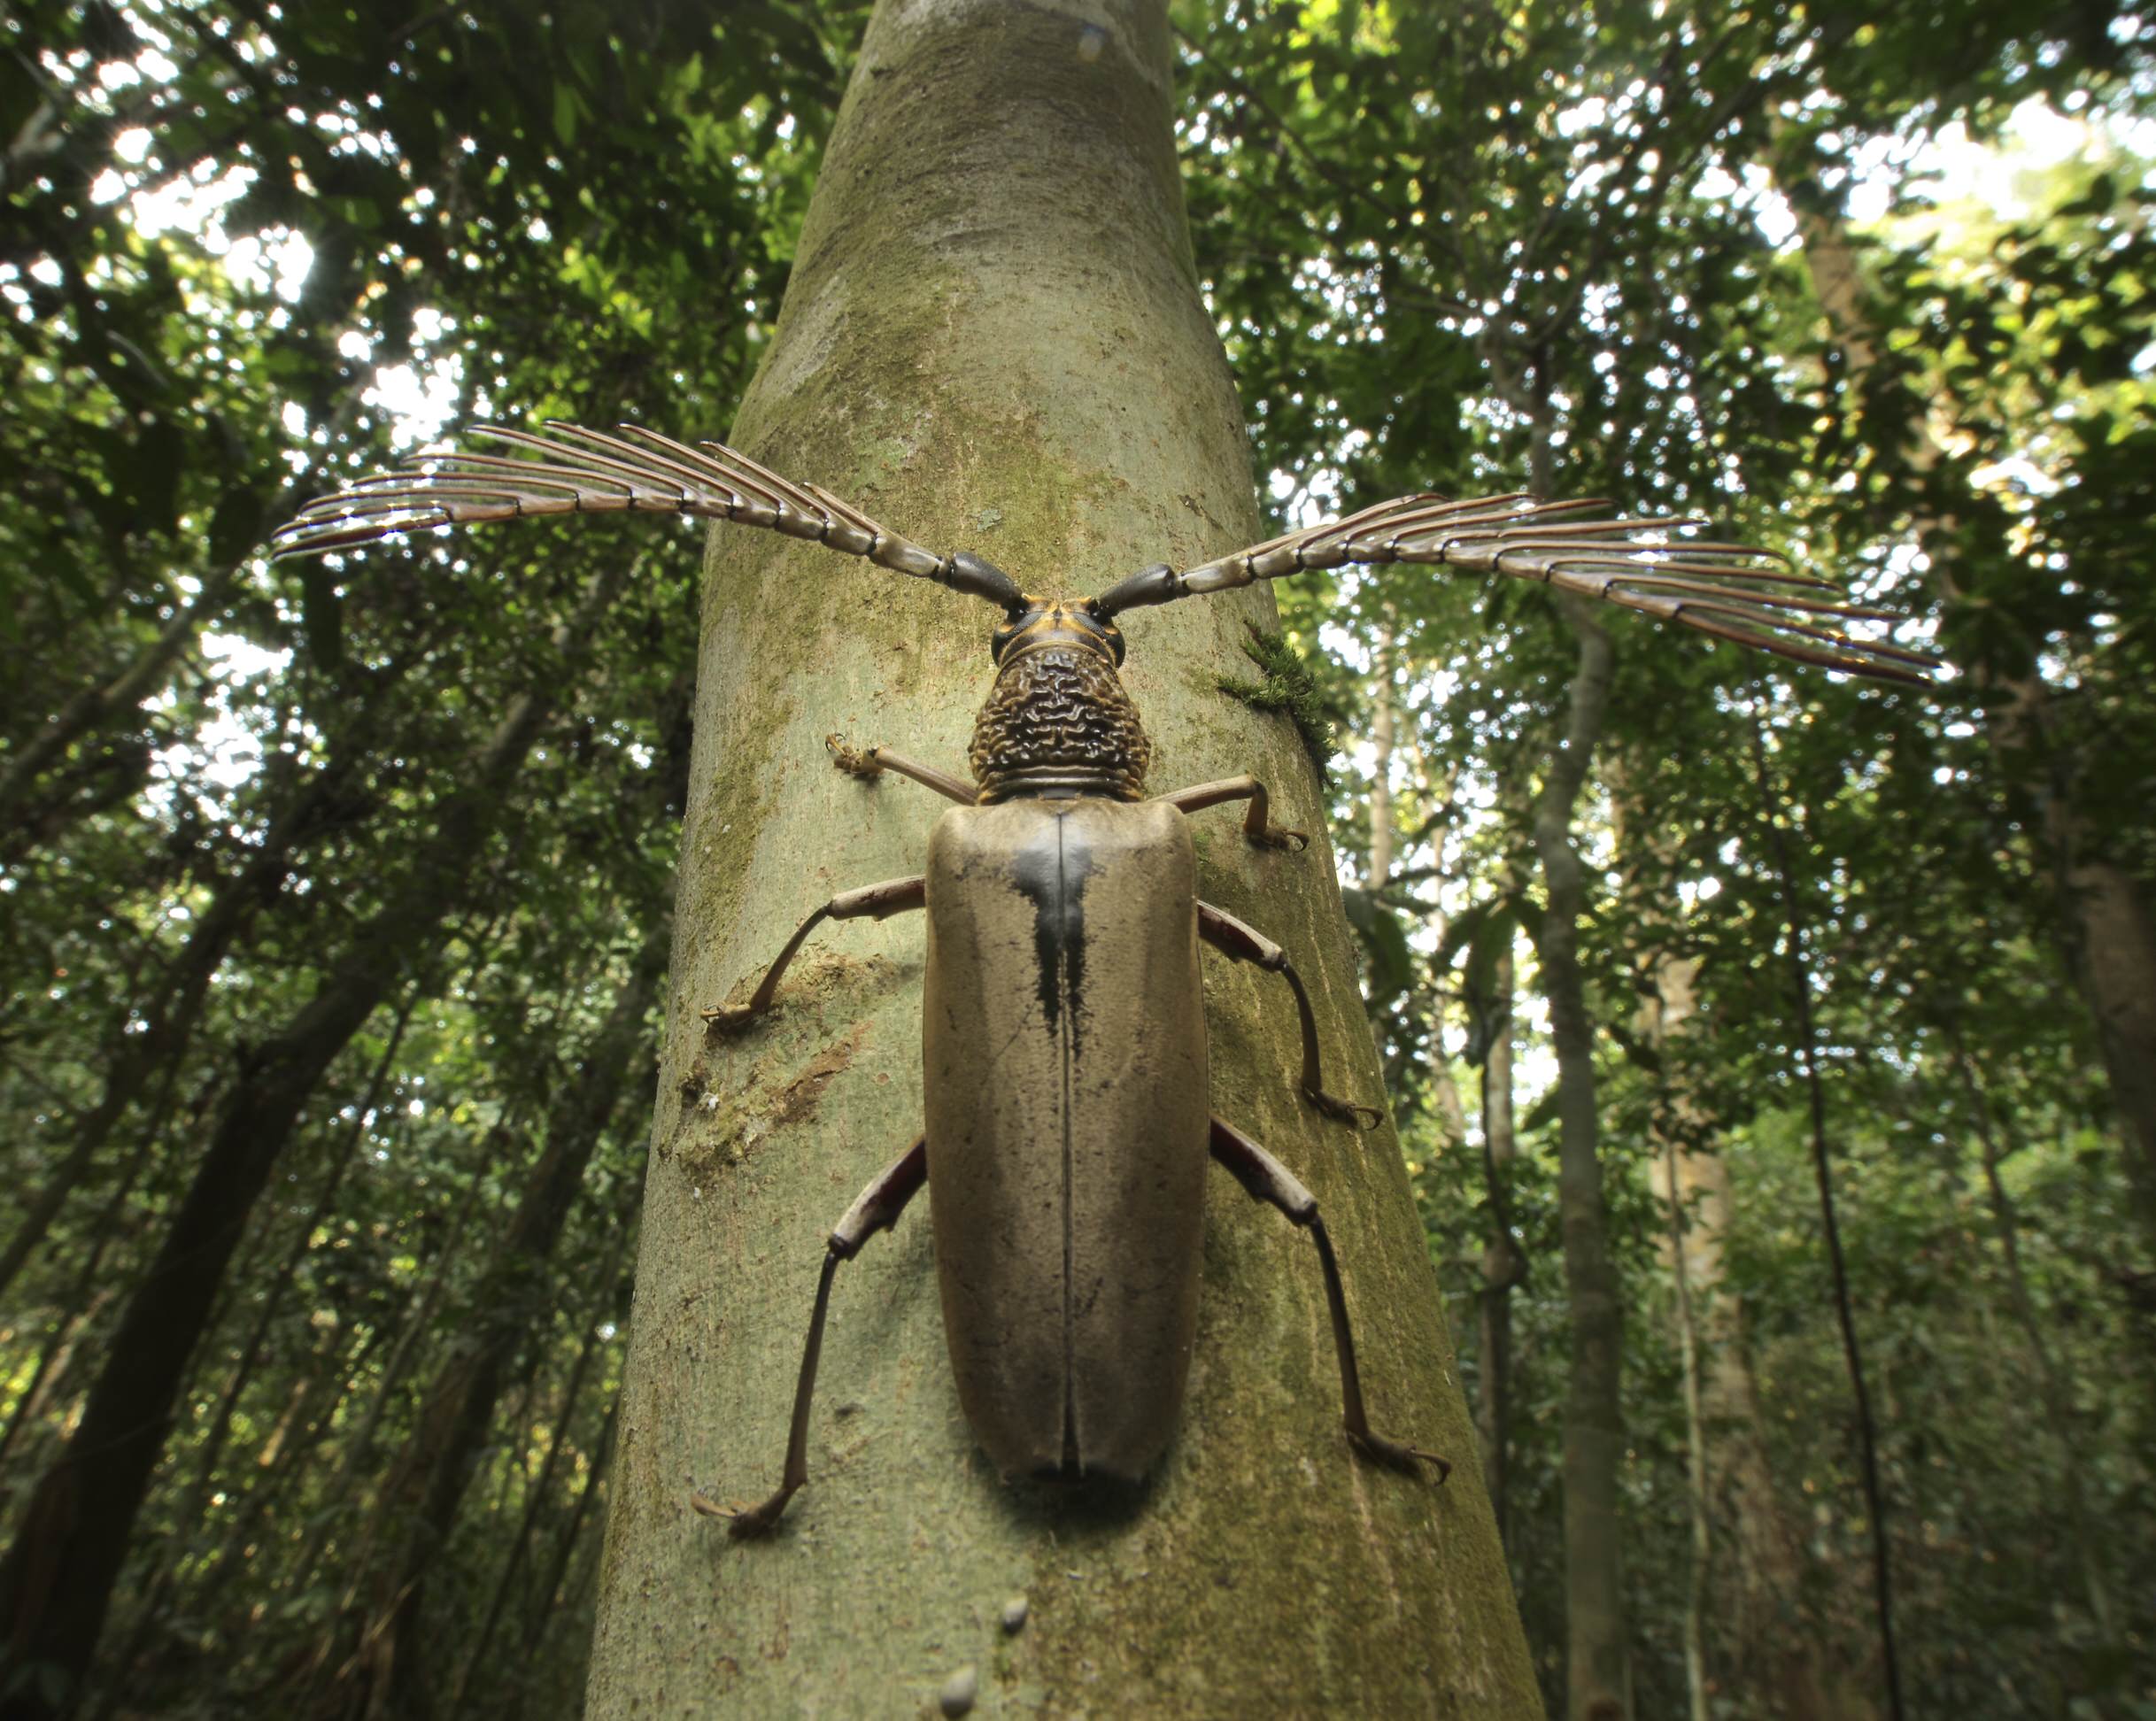 This male cerambycid, like many longhorn beetles, has impressive antennae – in this case about 12cm from tip to tip – to detect and locate females, who produce a sex-attractant pheromone.